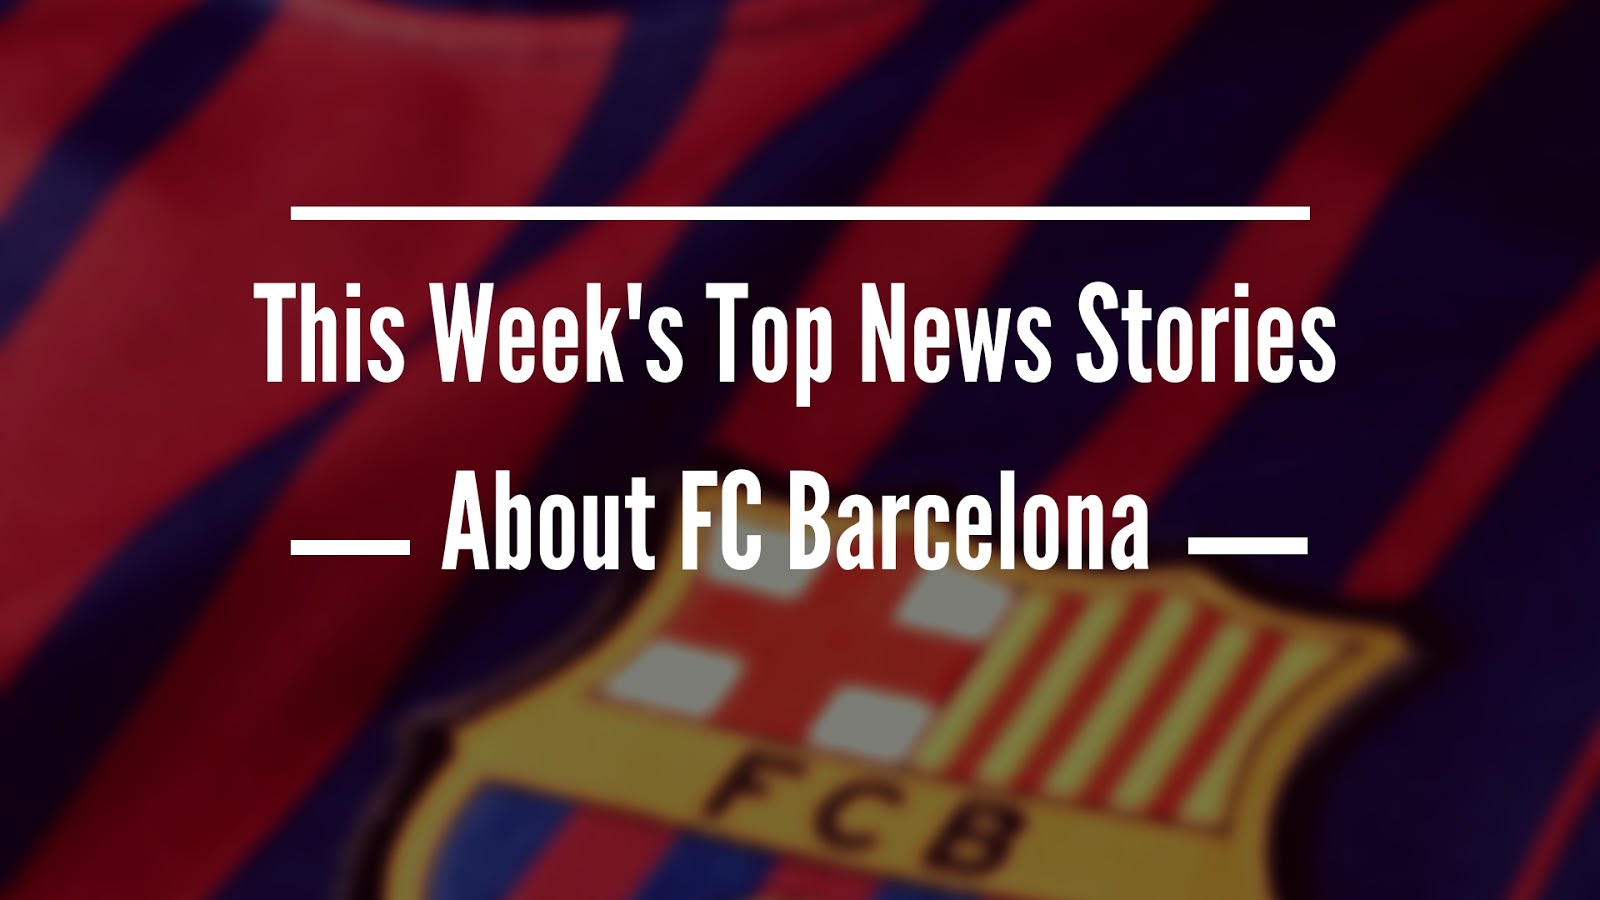 This Week's Top News Stories About FC Barcelona #FCBarcelona #Barca